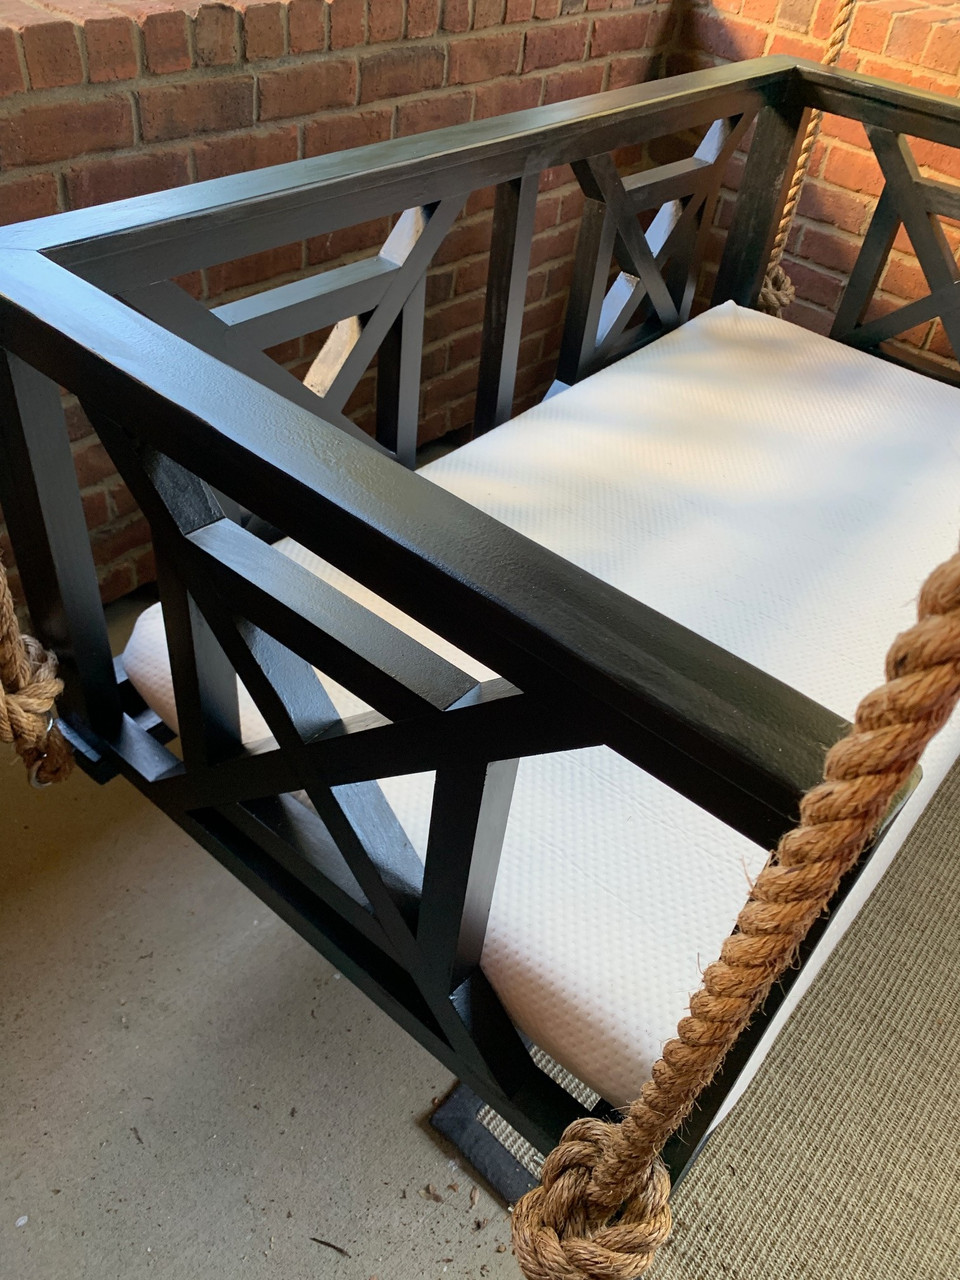 1.5 Hand-Spliced Black Rope Package - Lowcountry Swing Beds